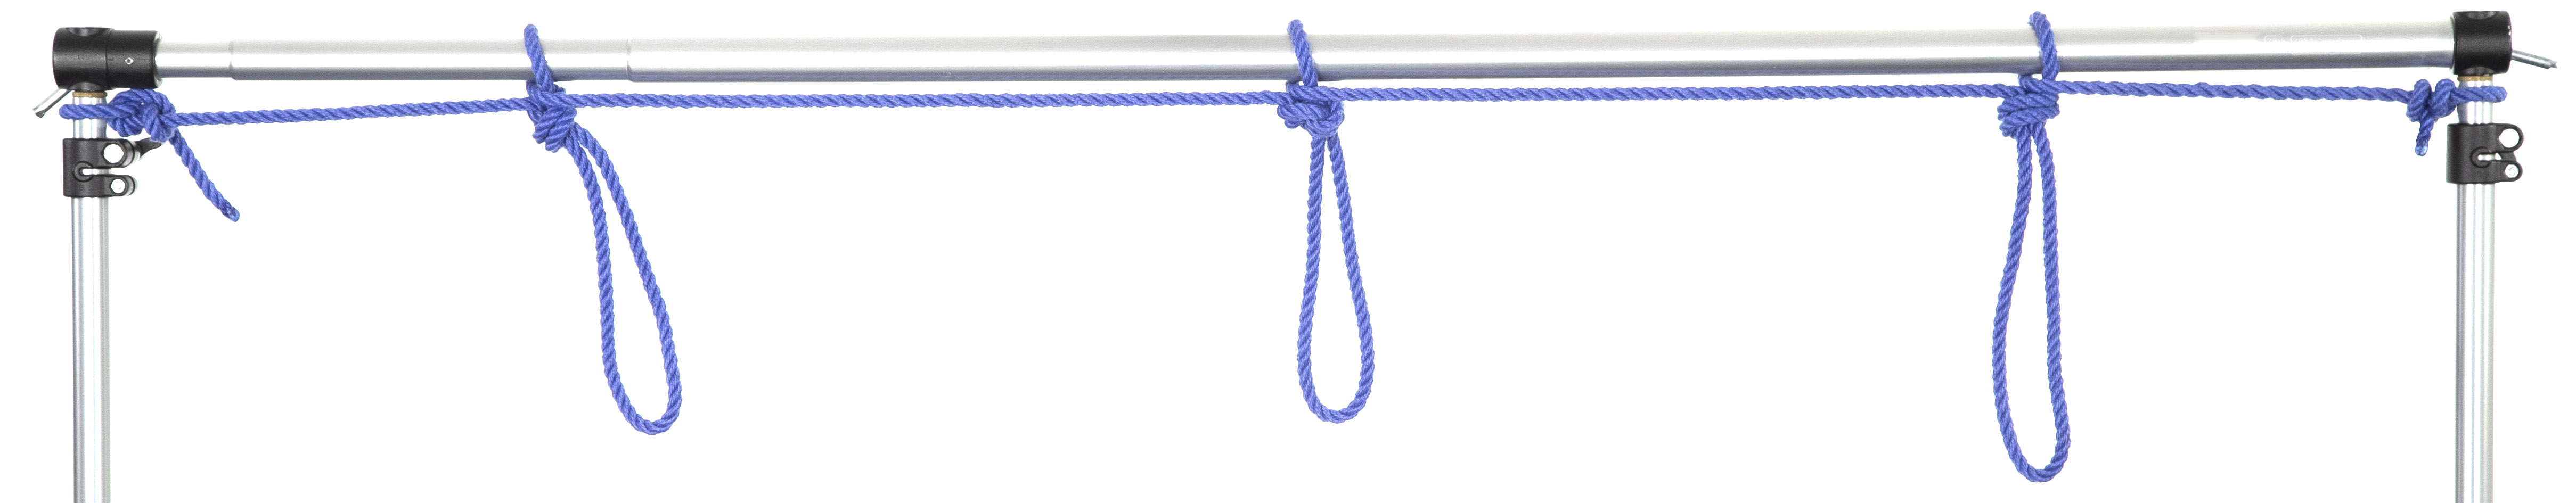 A one inch aluminum pipe crosses the frame horizontally. It is supported by two vertical pipes of the same material. A blue rope is tied off to the left support and runs along the horizontal pipe, making three evenly spaced loops along its length. It is then tied off to the right support.